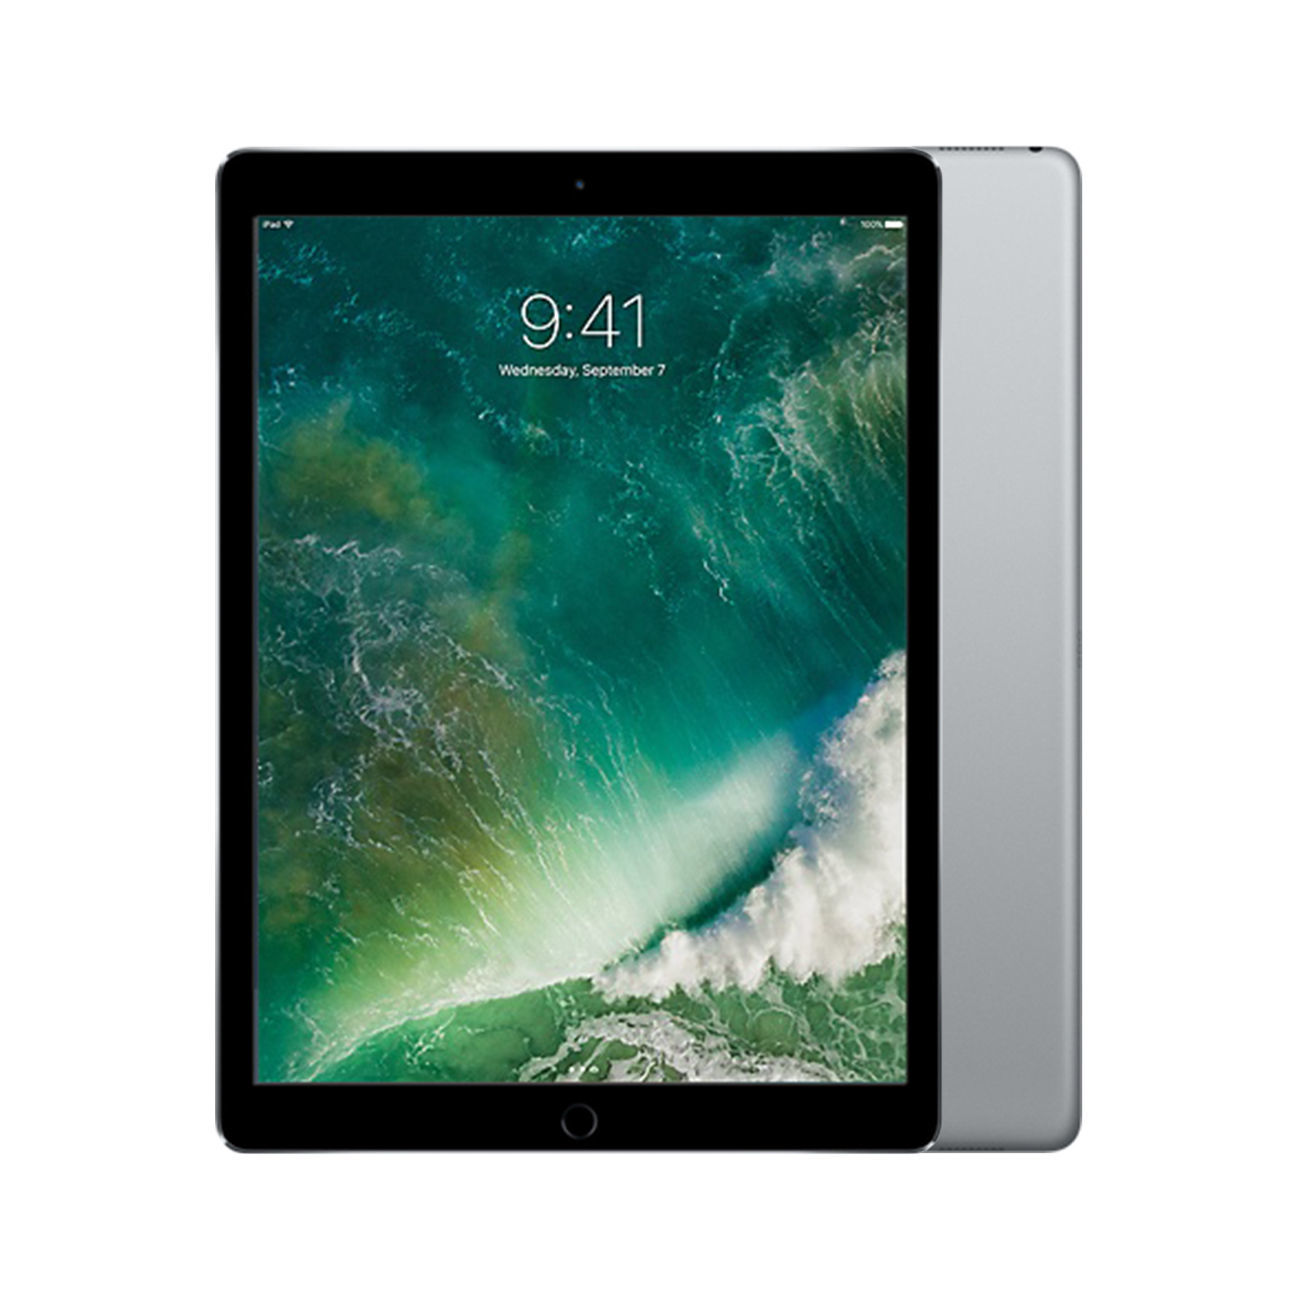 Apple iPad Pro 9.7 Wi-Fi + Cellular [128GB] [Space Grey] [Excellent] [12M]